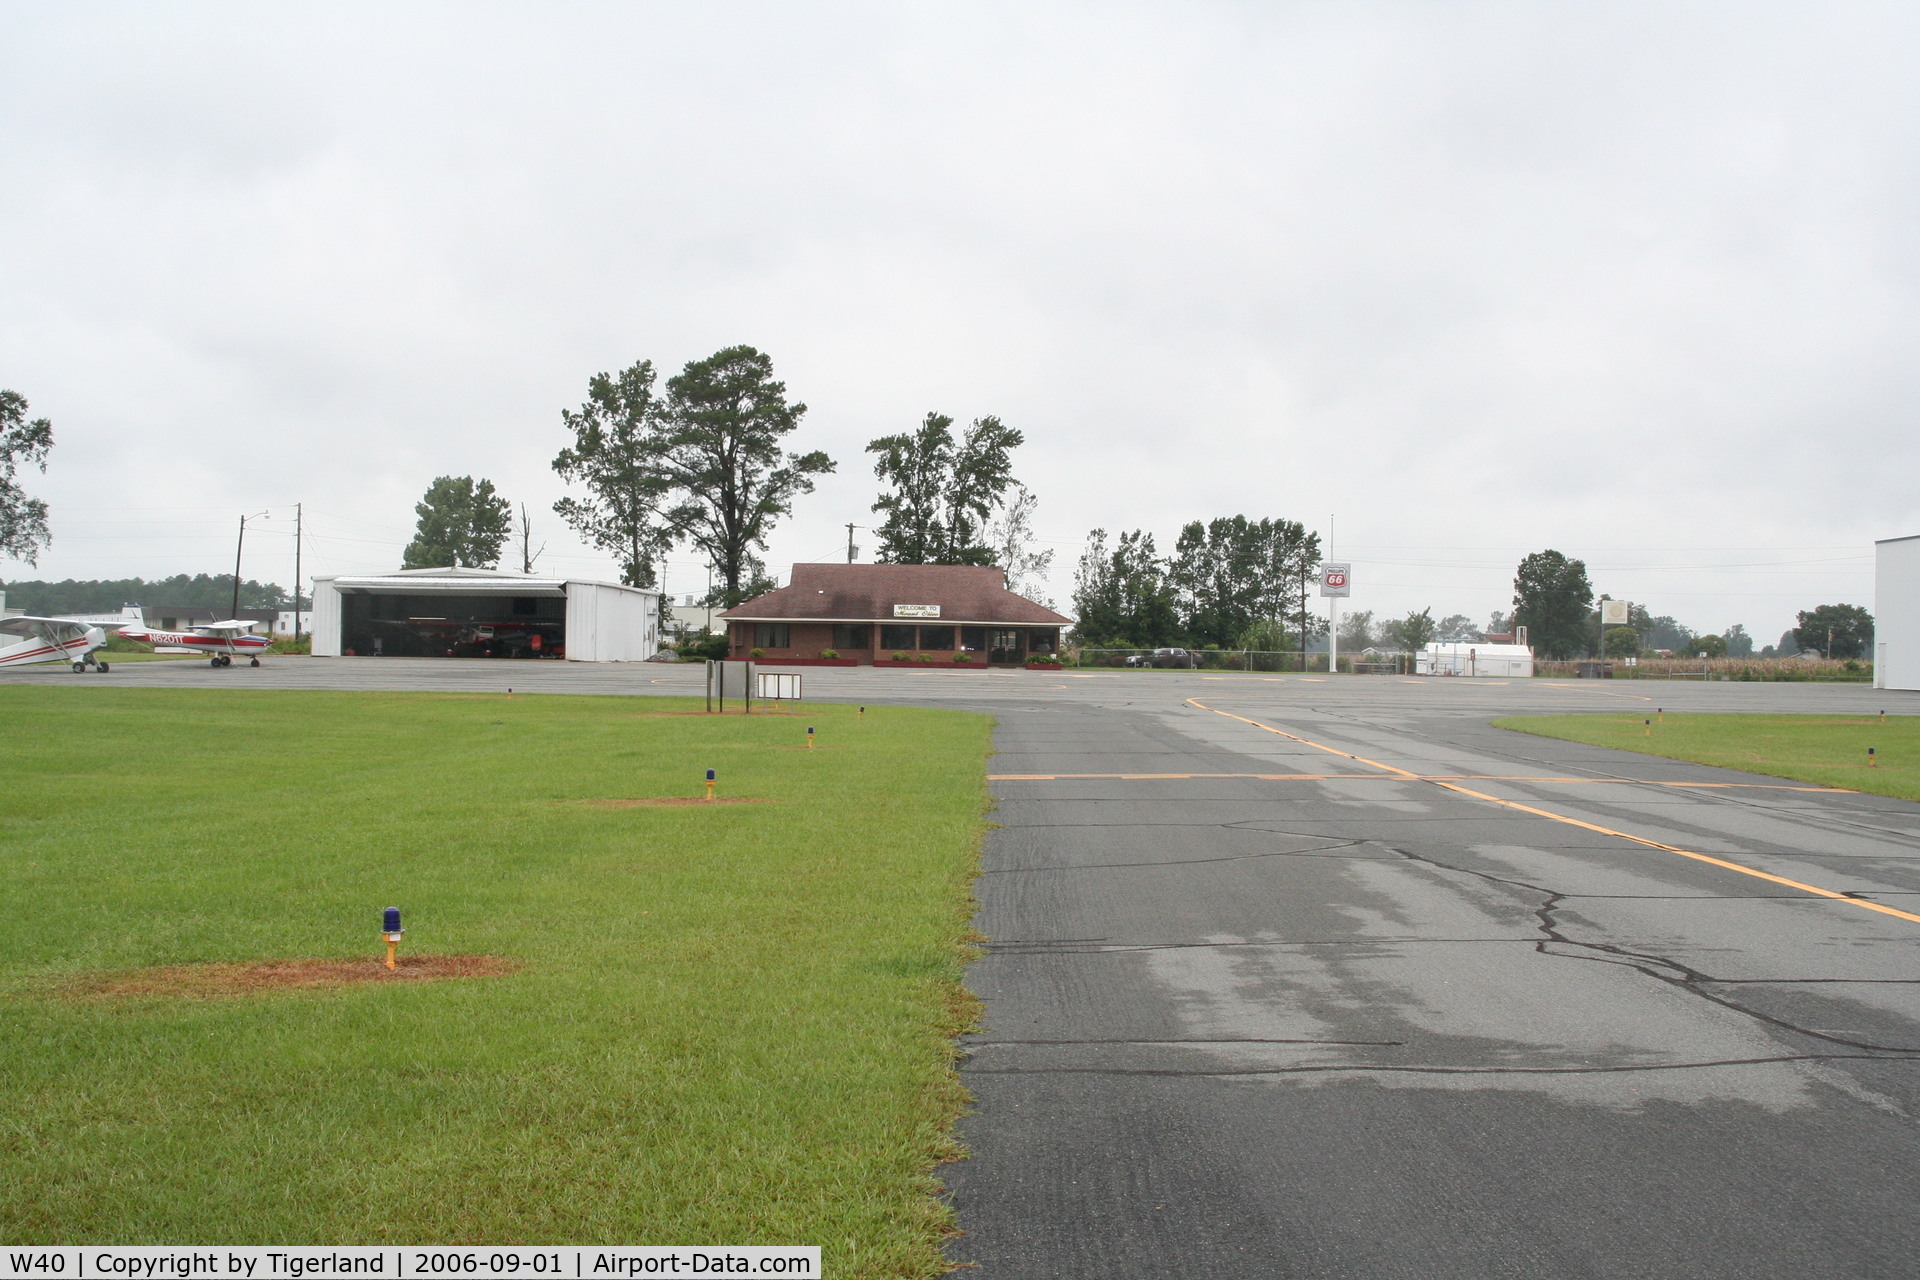 Mount Olive Municipal Airport (W40) - Clean facility-Friendly staff